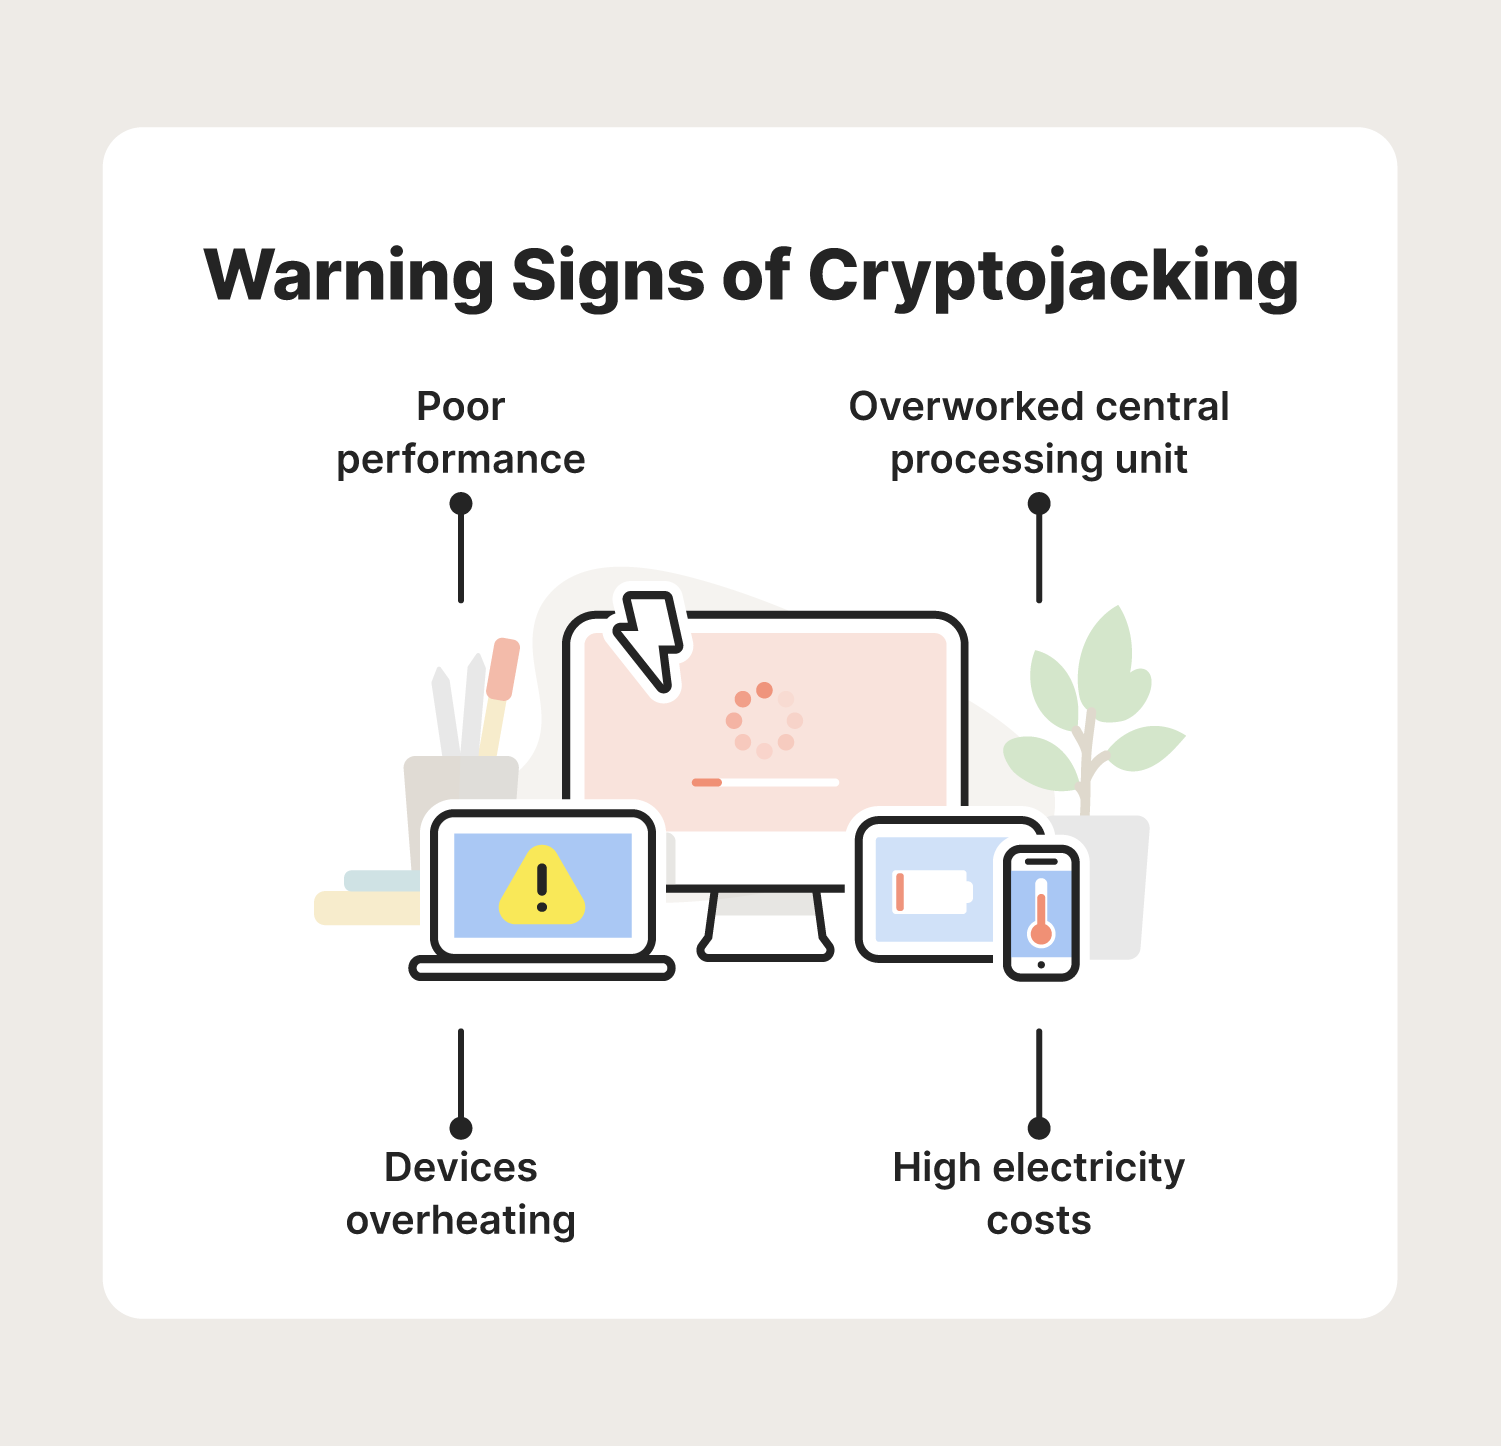 A graphic shows what cryptojacking warning signs look like on a laptop, desktop, tablet and smartphone.